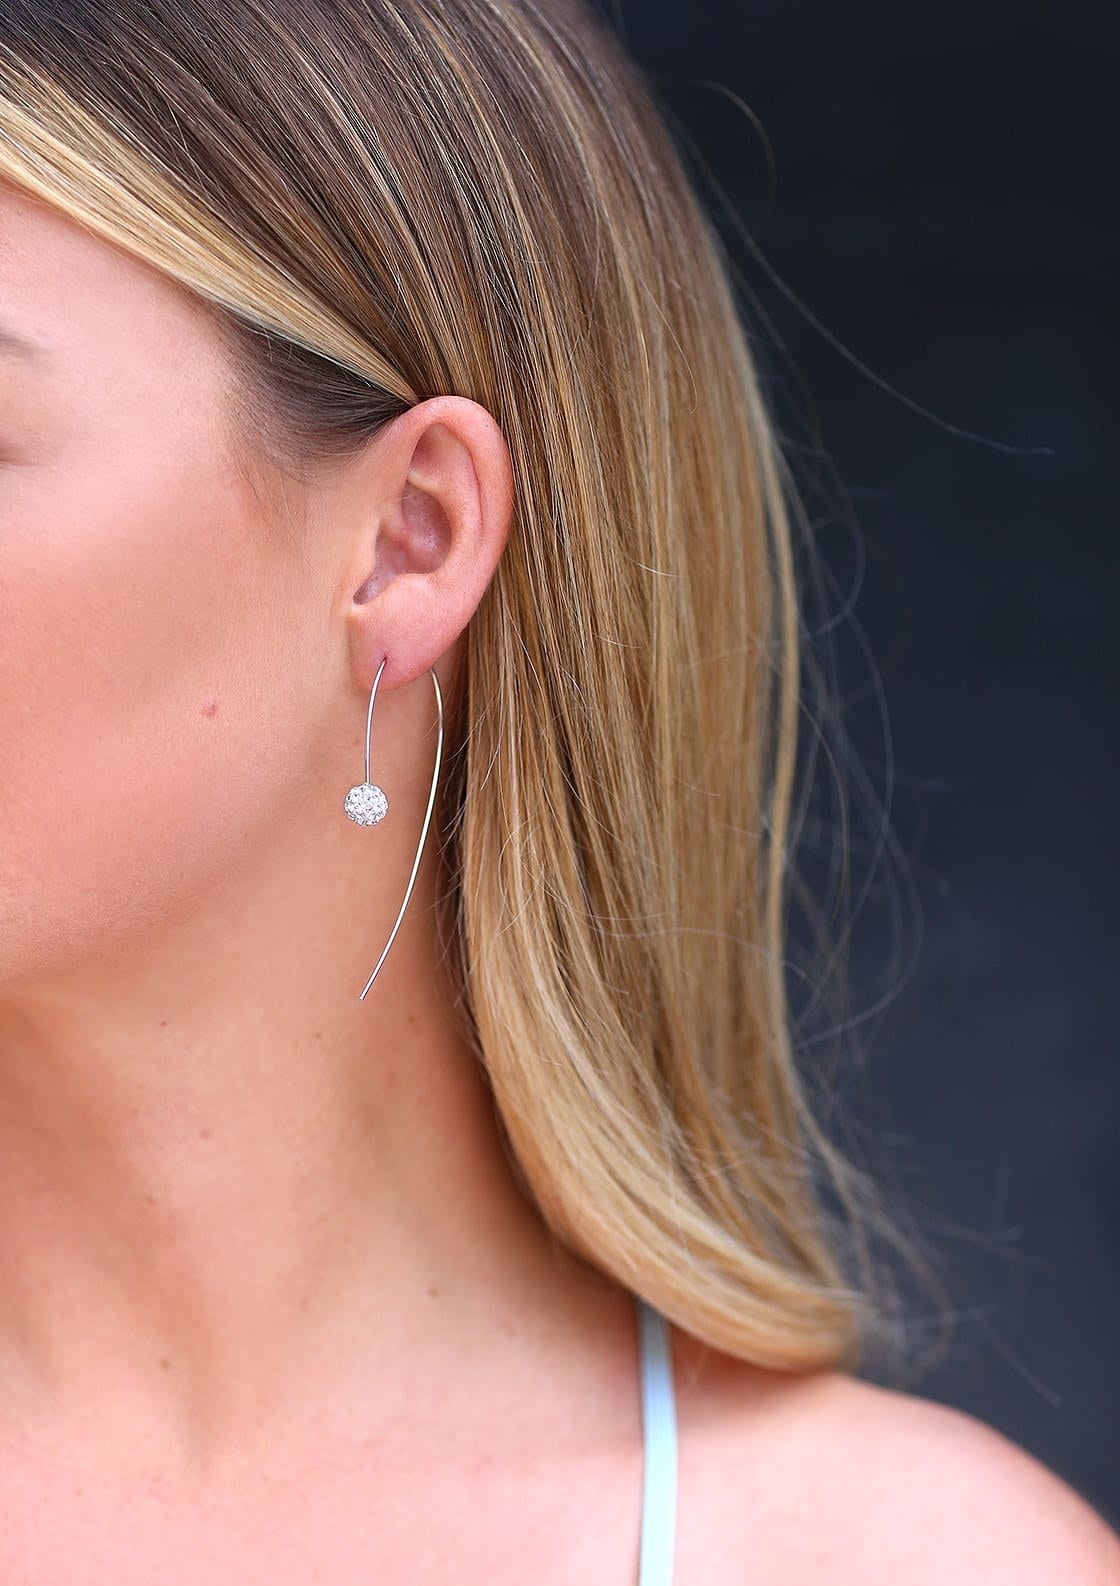 Model wearing silver threader earrings with a small rhinestone in the front